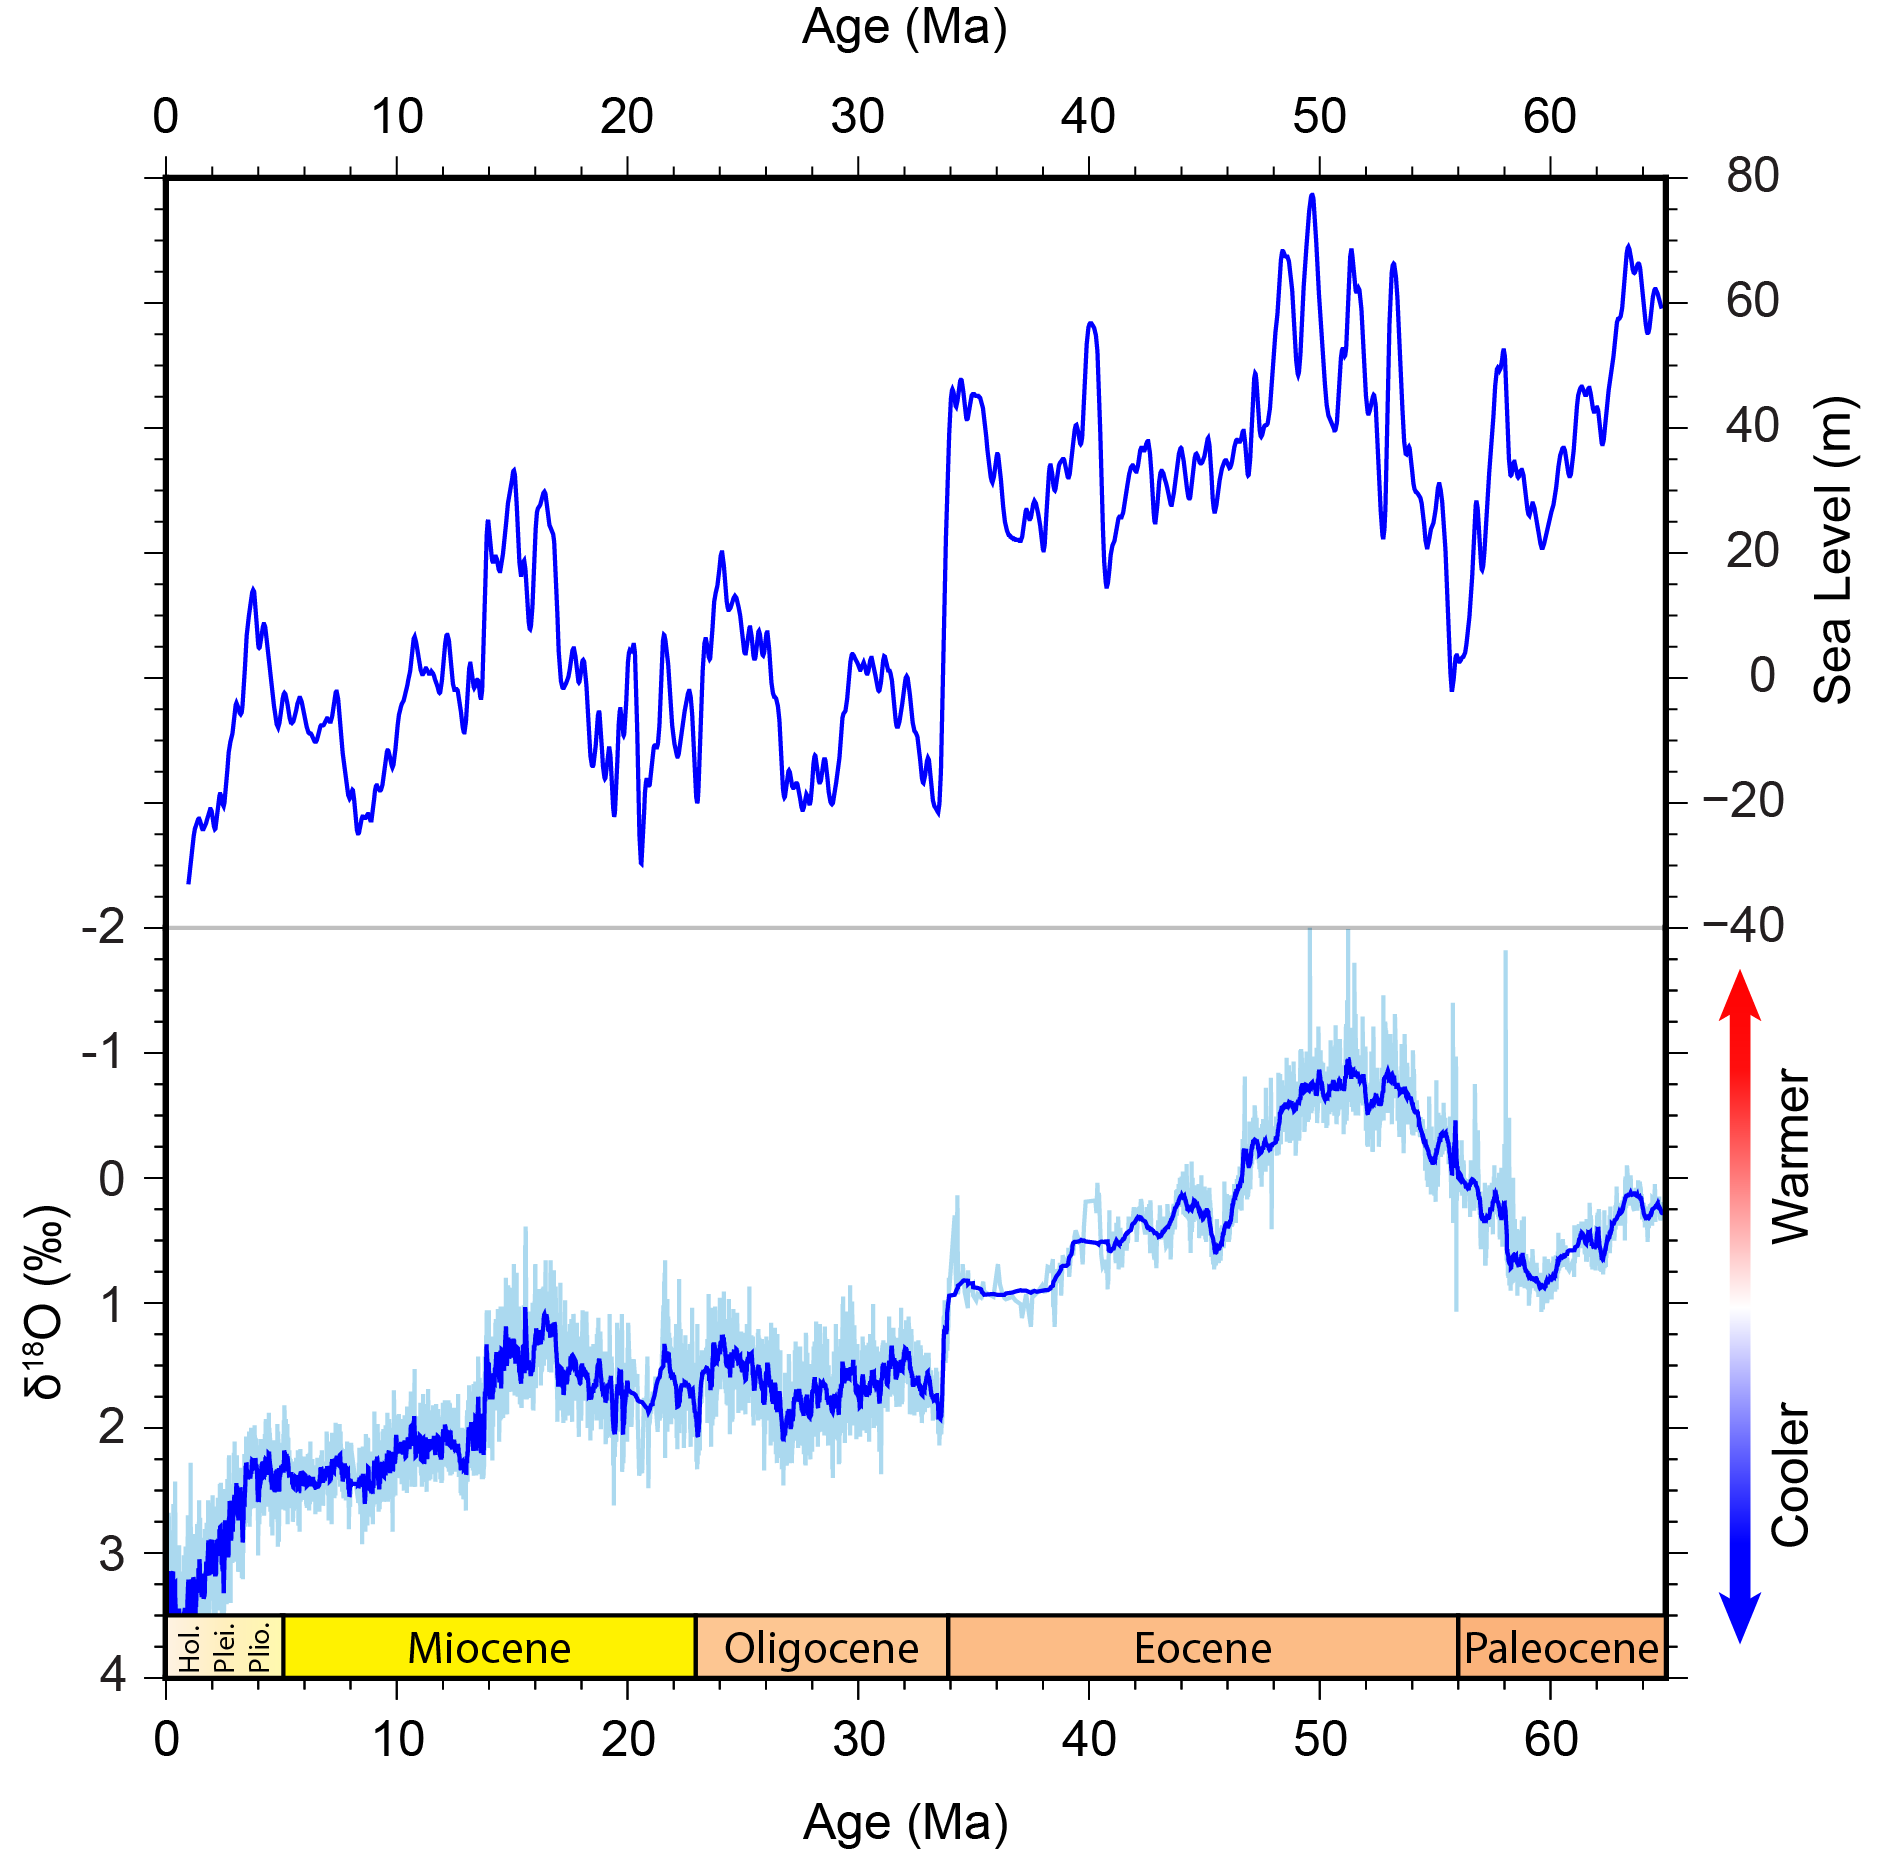 Oxygen-18 and sea level records for the past 65 million years show a general cooling trend with distinct climate events.